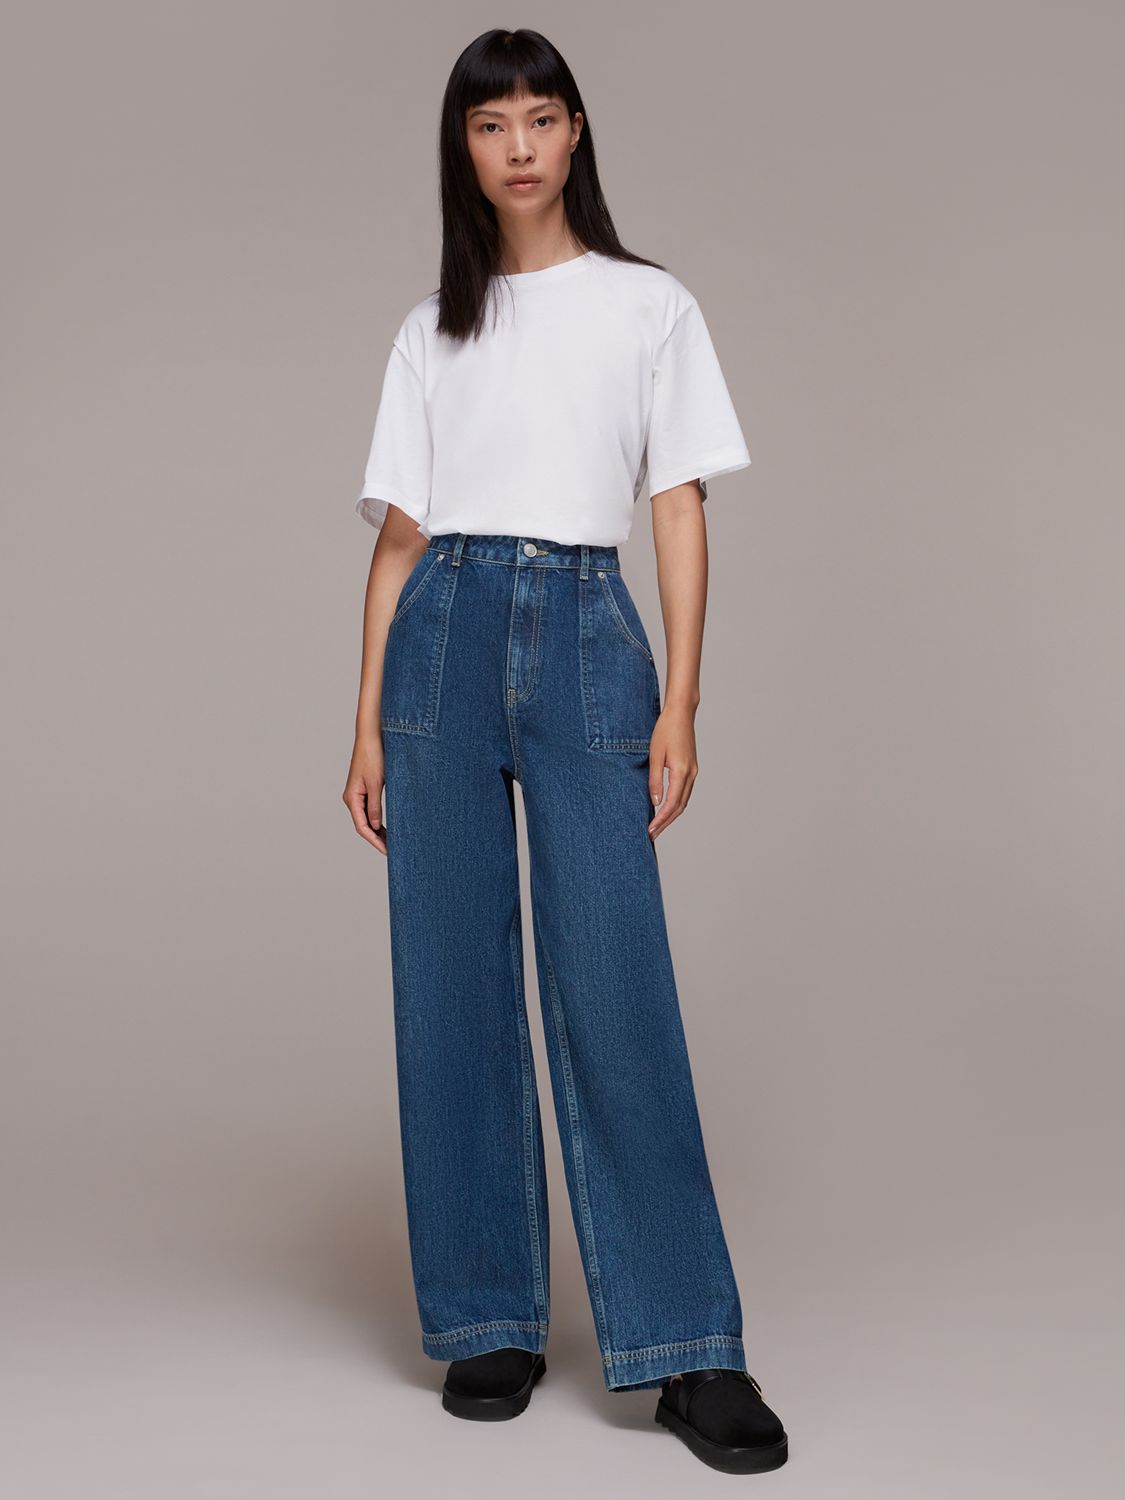 Whistles Petite Authentic Raya Straight Jeans, Blue at John Lewis ...